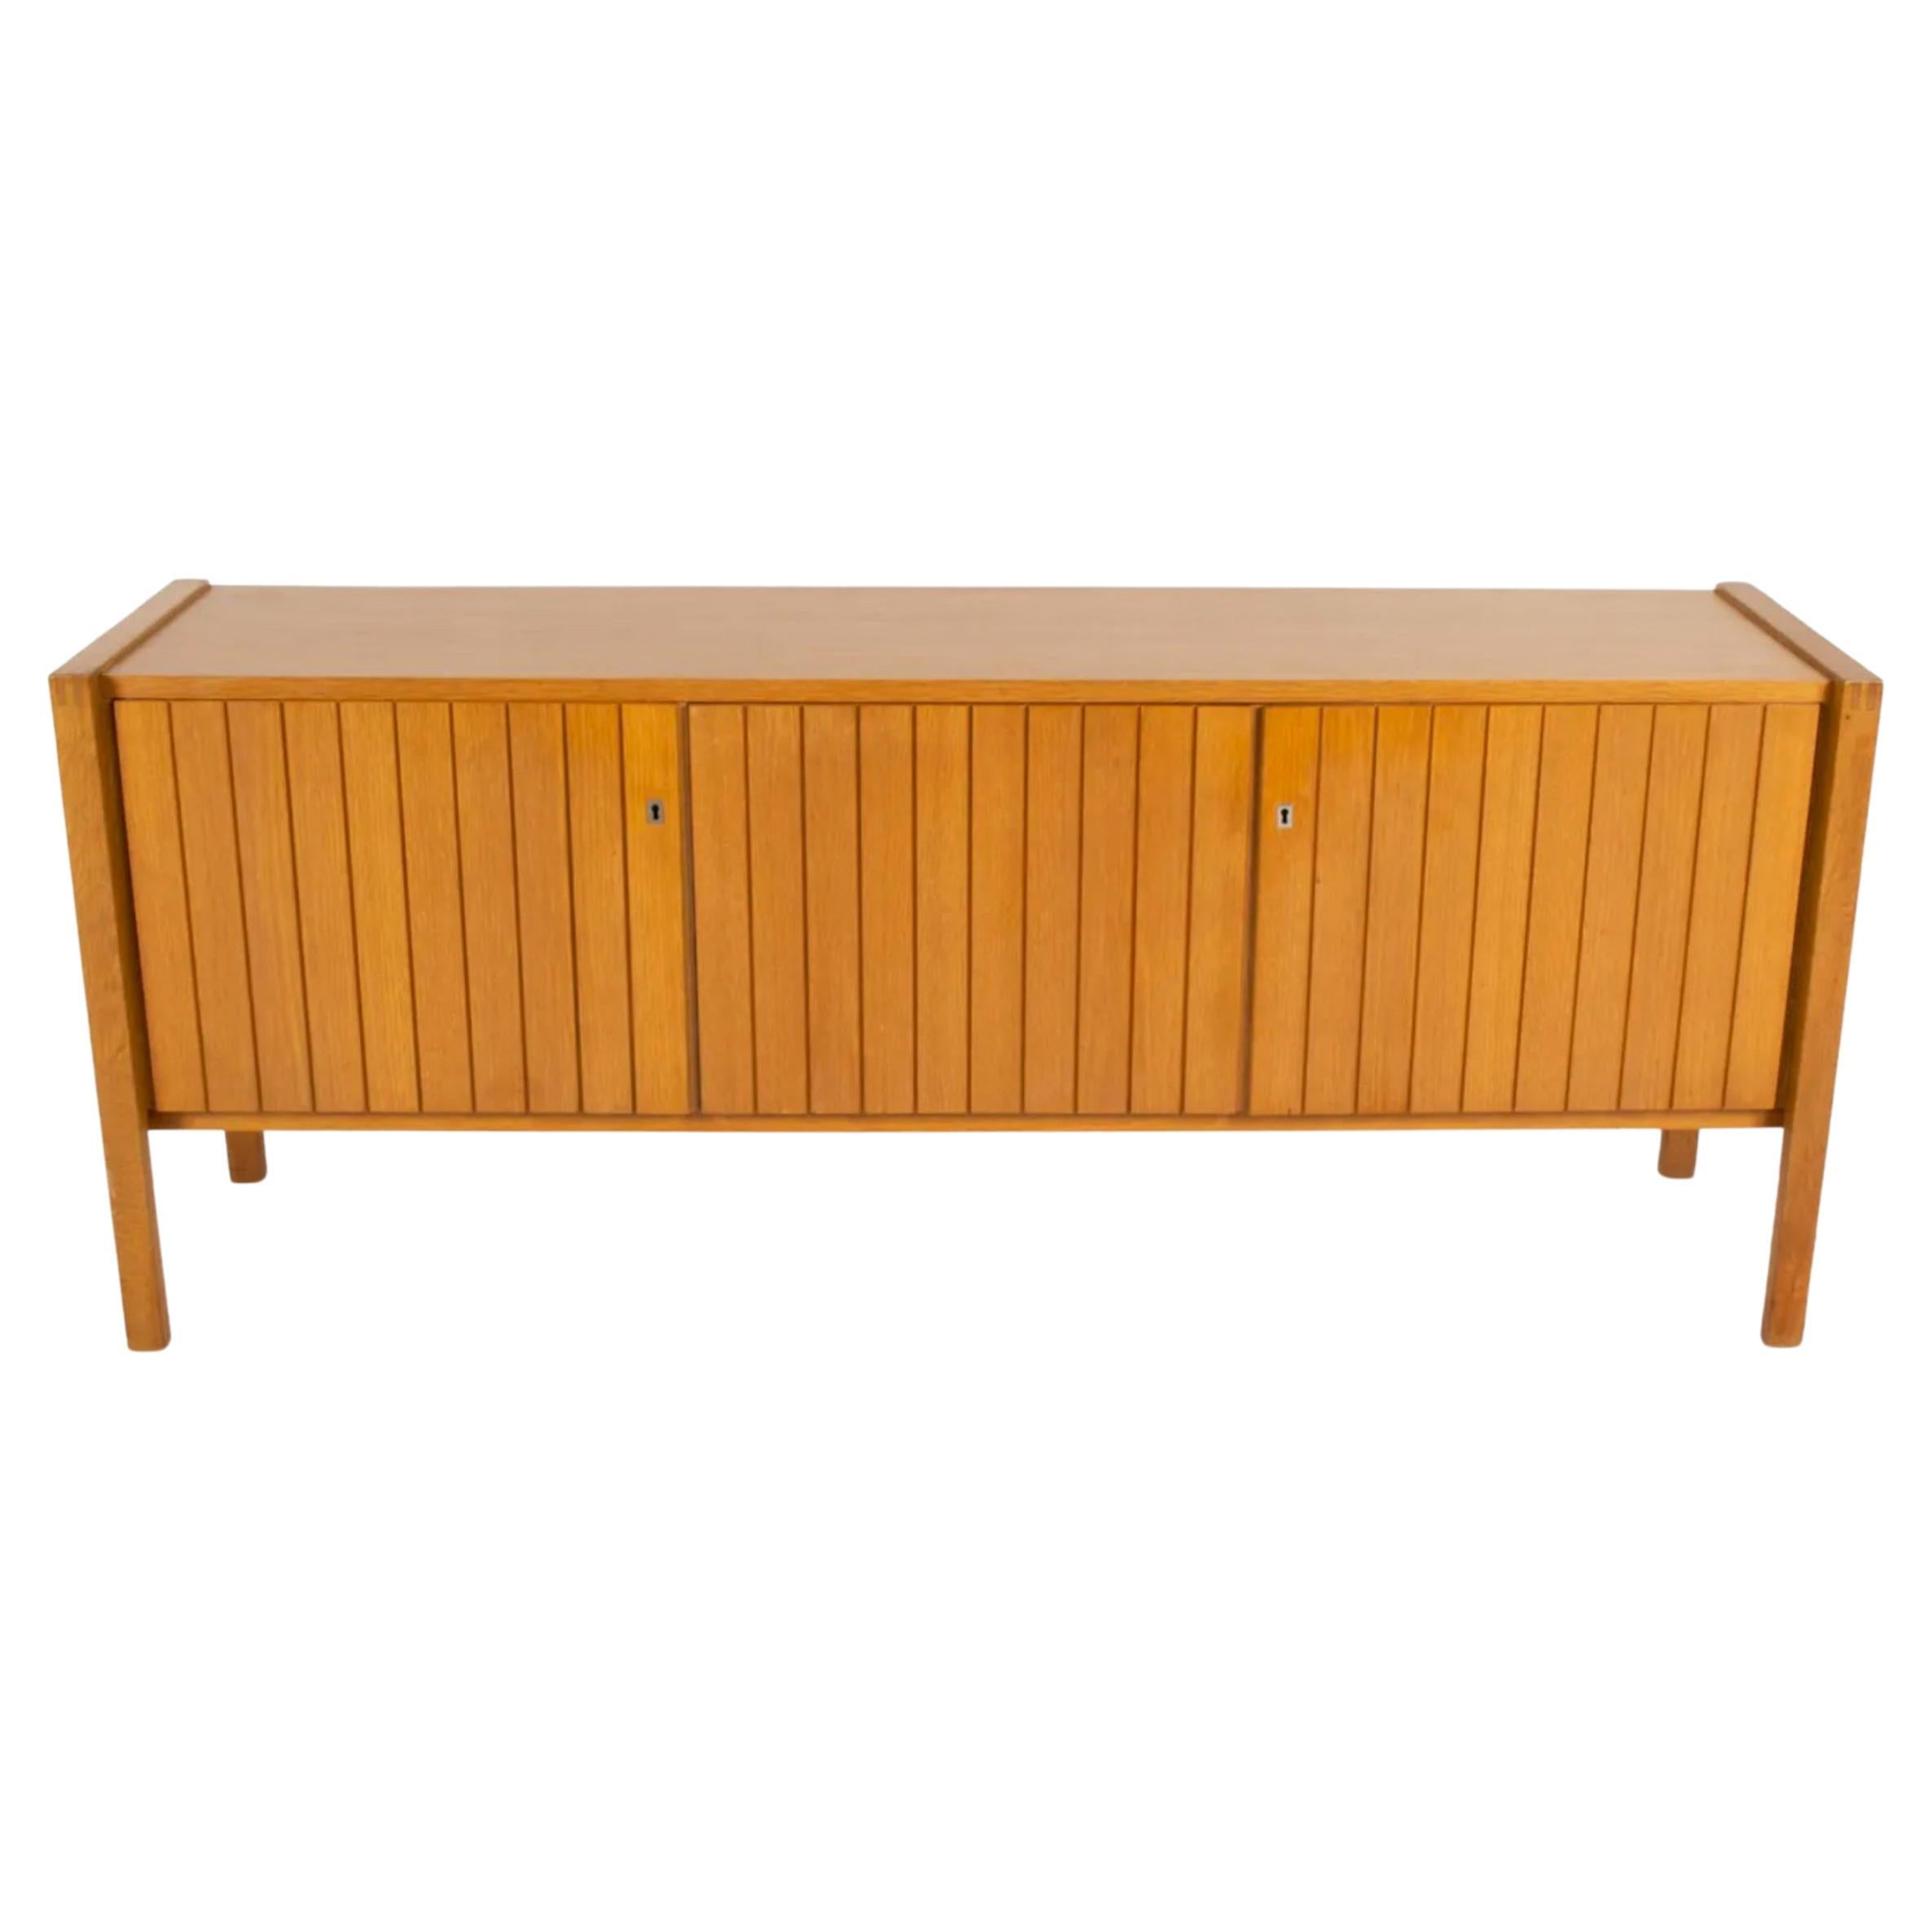 Stunning Mid Century modern German Oak Paneled Credenza 3 door with key In Good Condition For Sale In BROOKLYN, NY